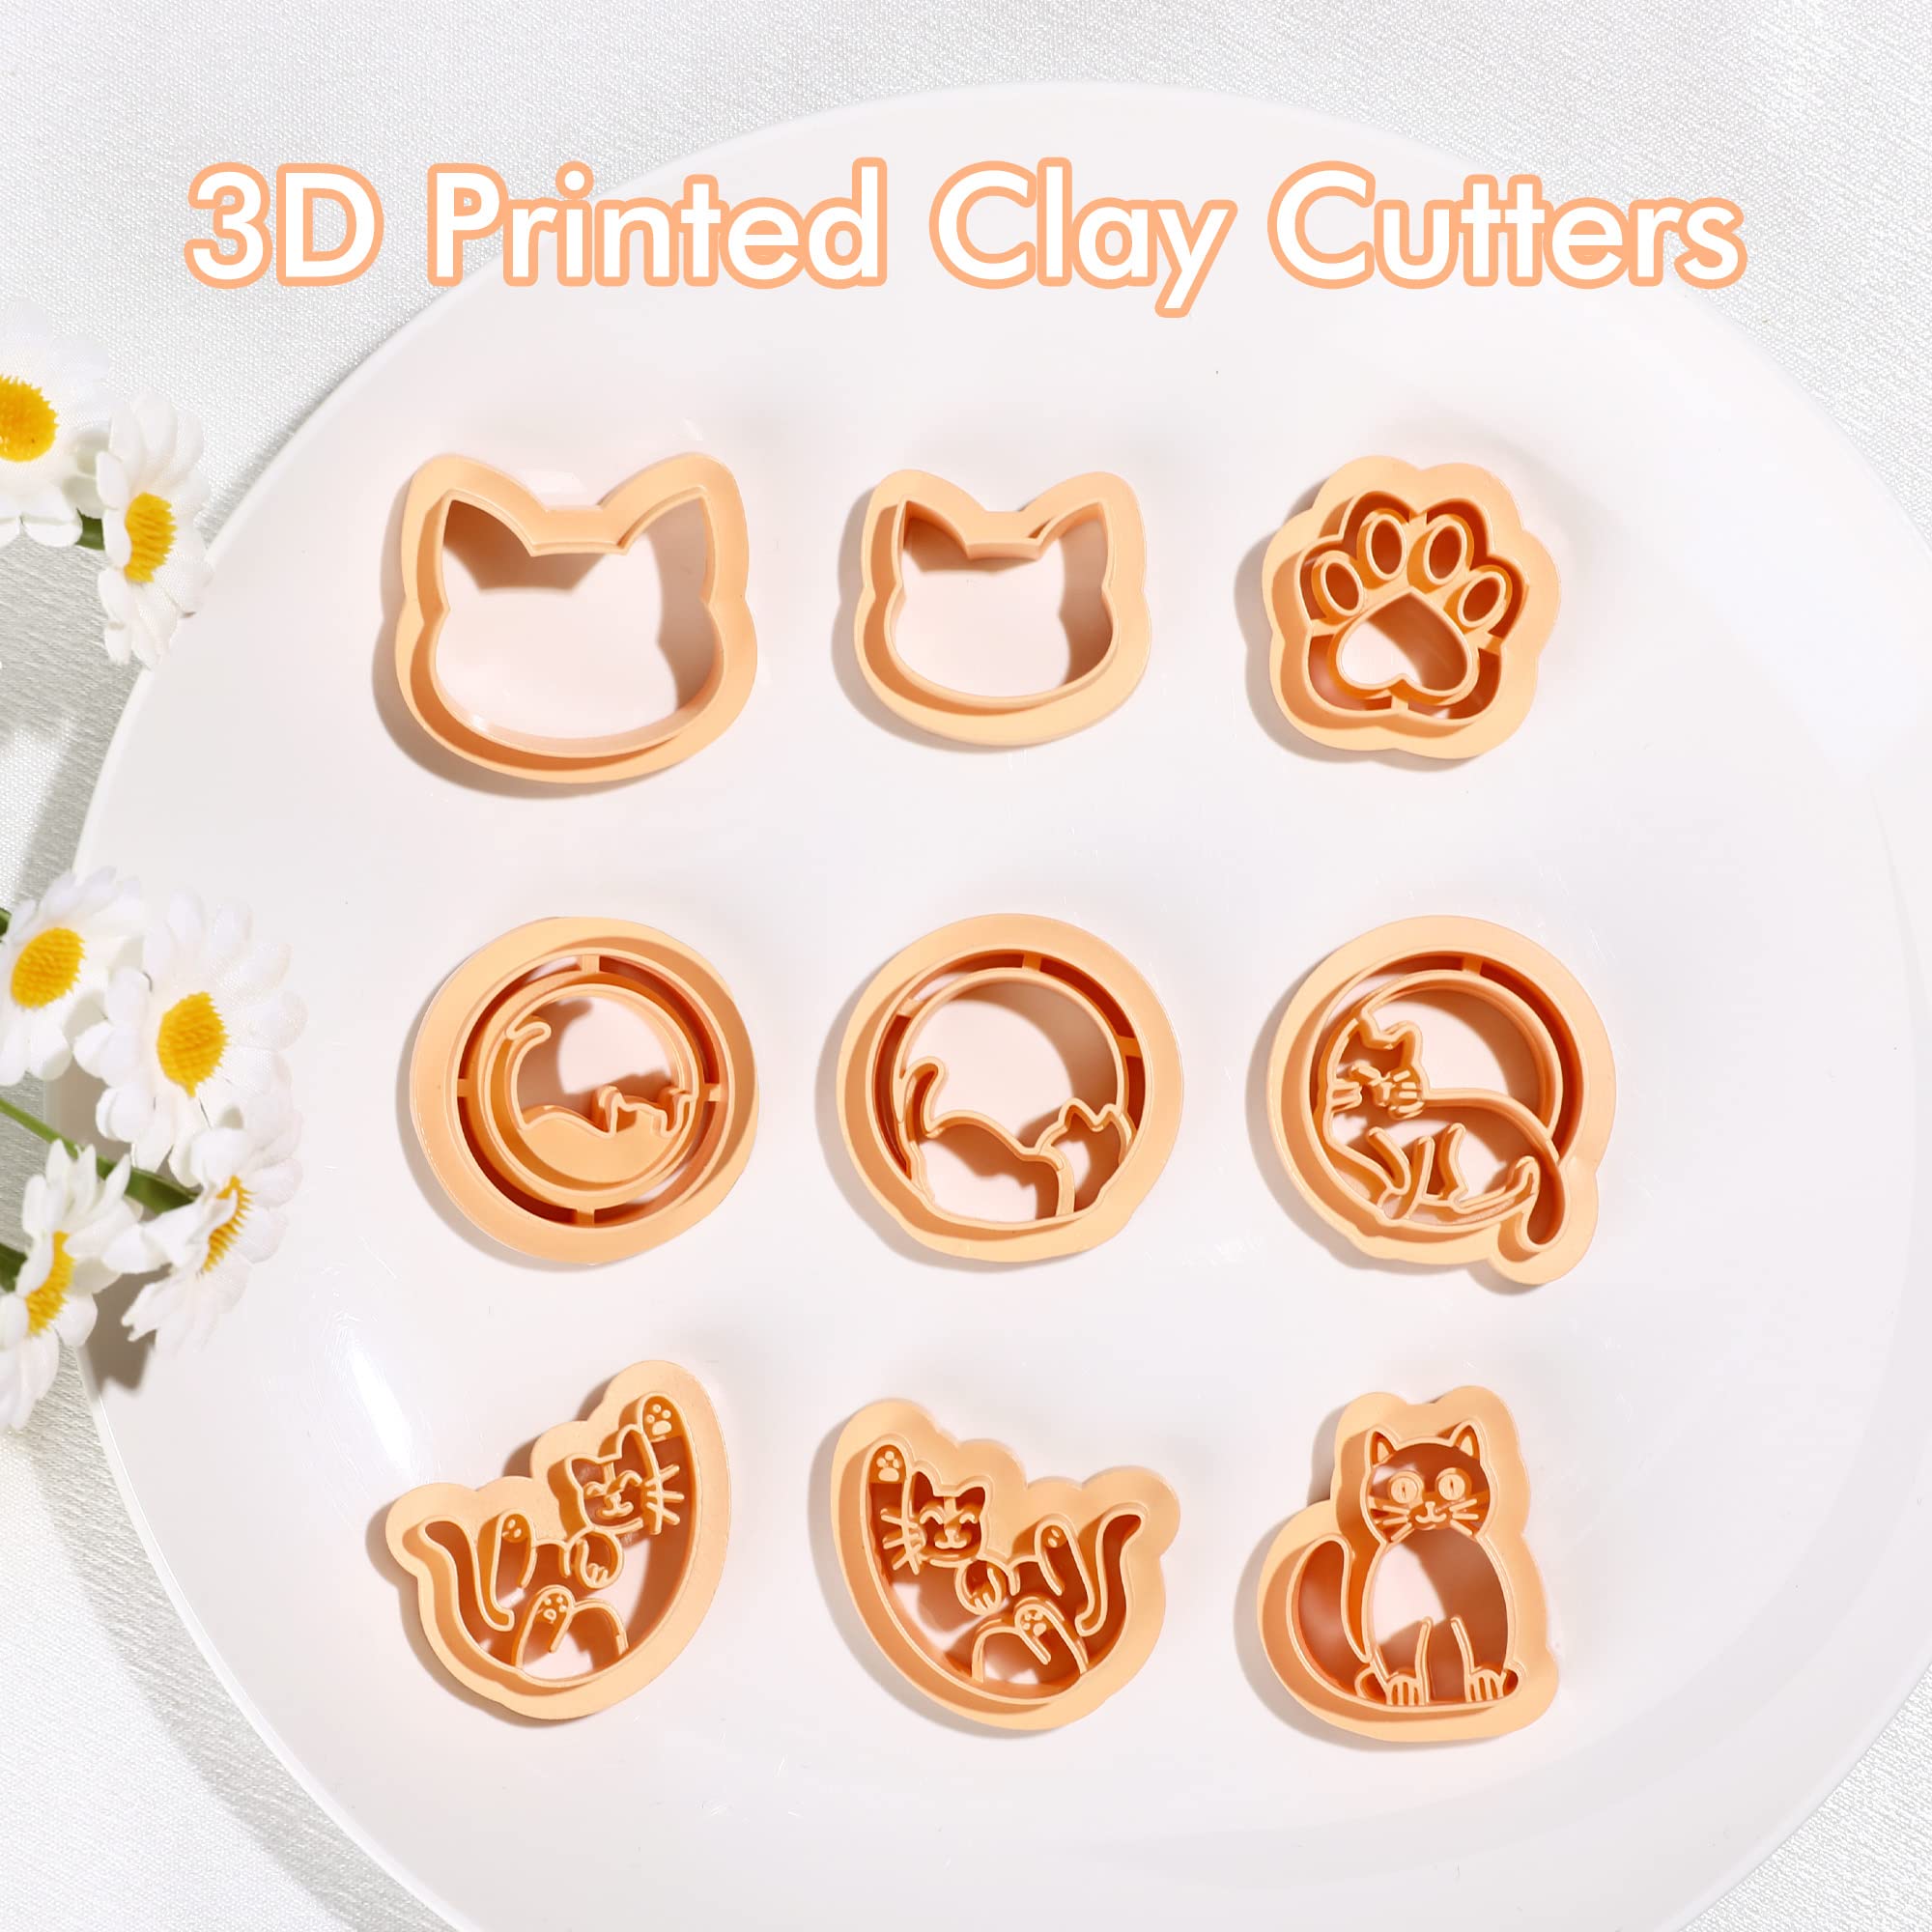 fuxiste 142 pcs polymer clay cutters, 24 shapes clay earring